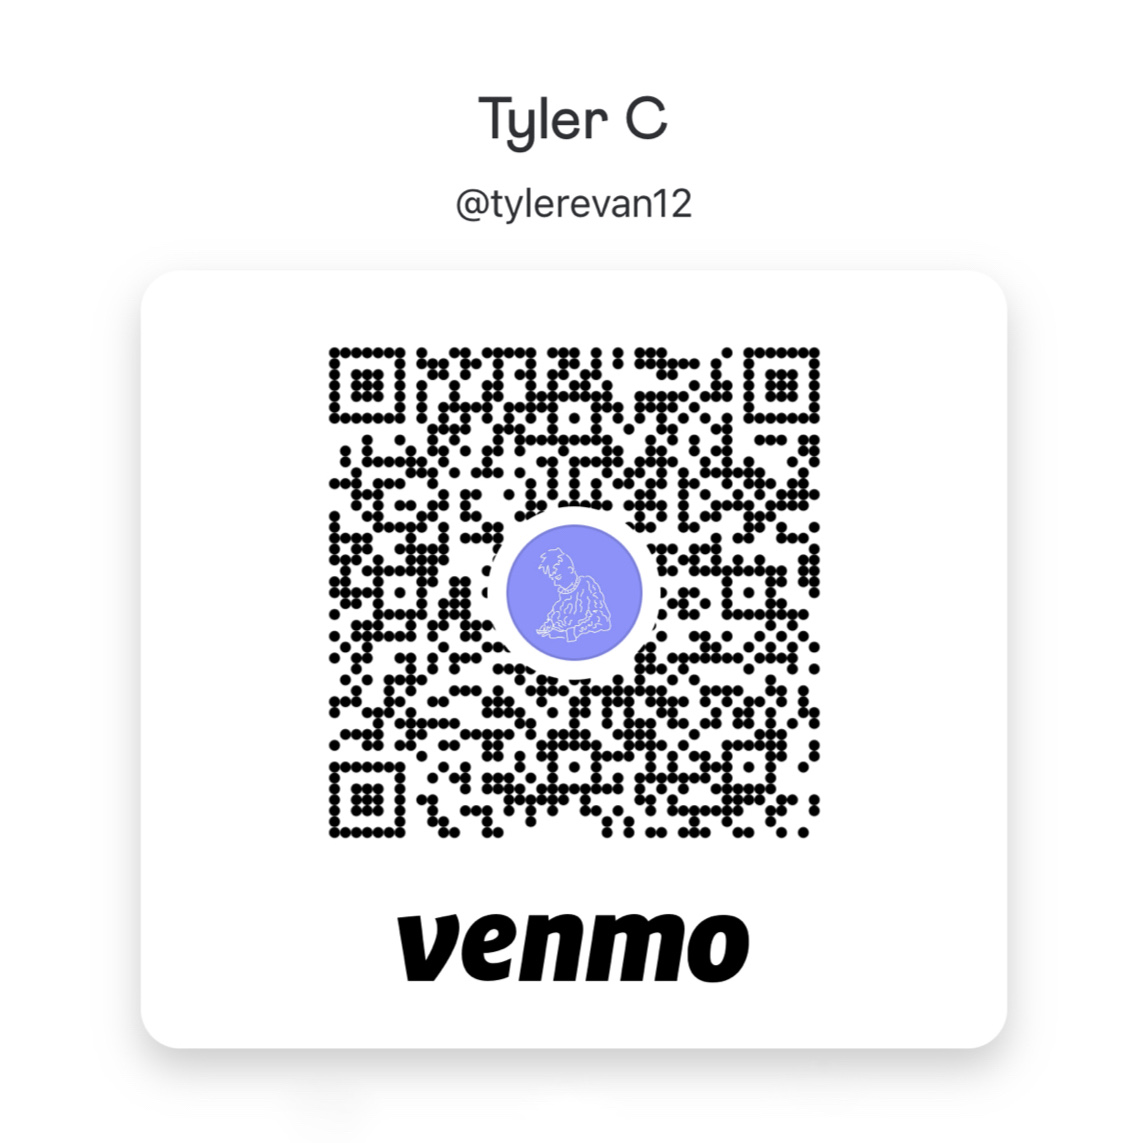 A QR Code of my venmo account, which can alternately be accessed at this link: https://venmo.com/u/tylerevan12